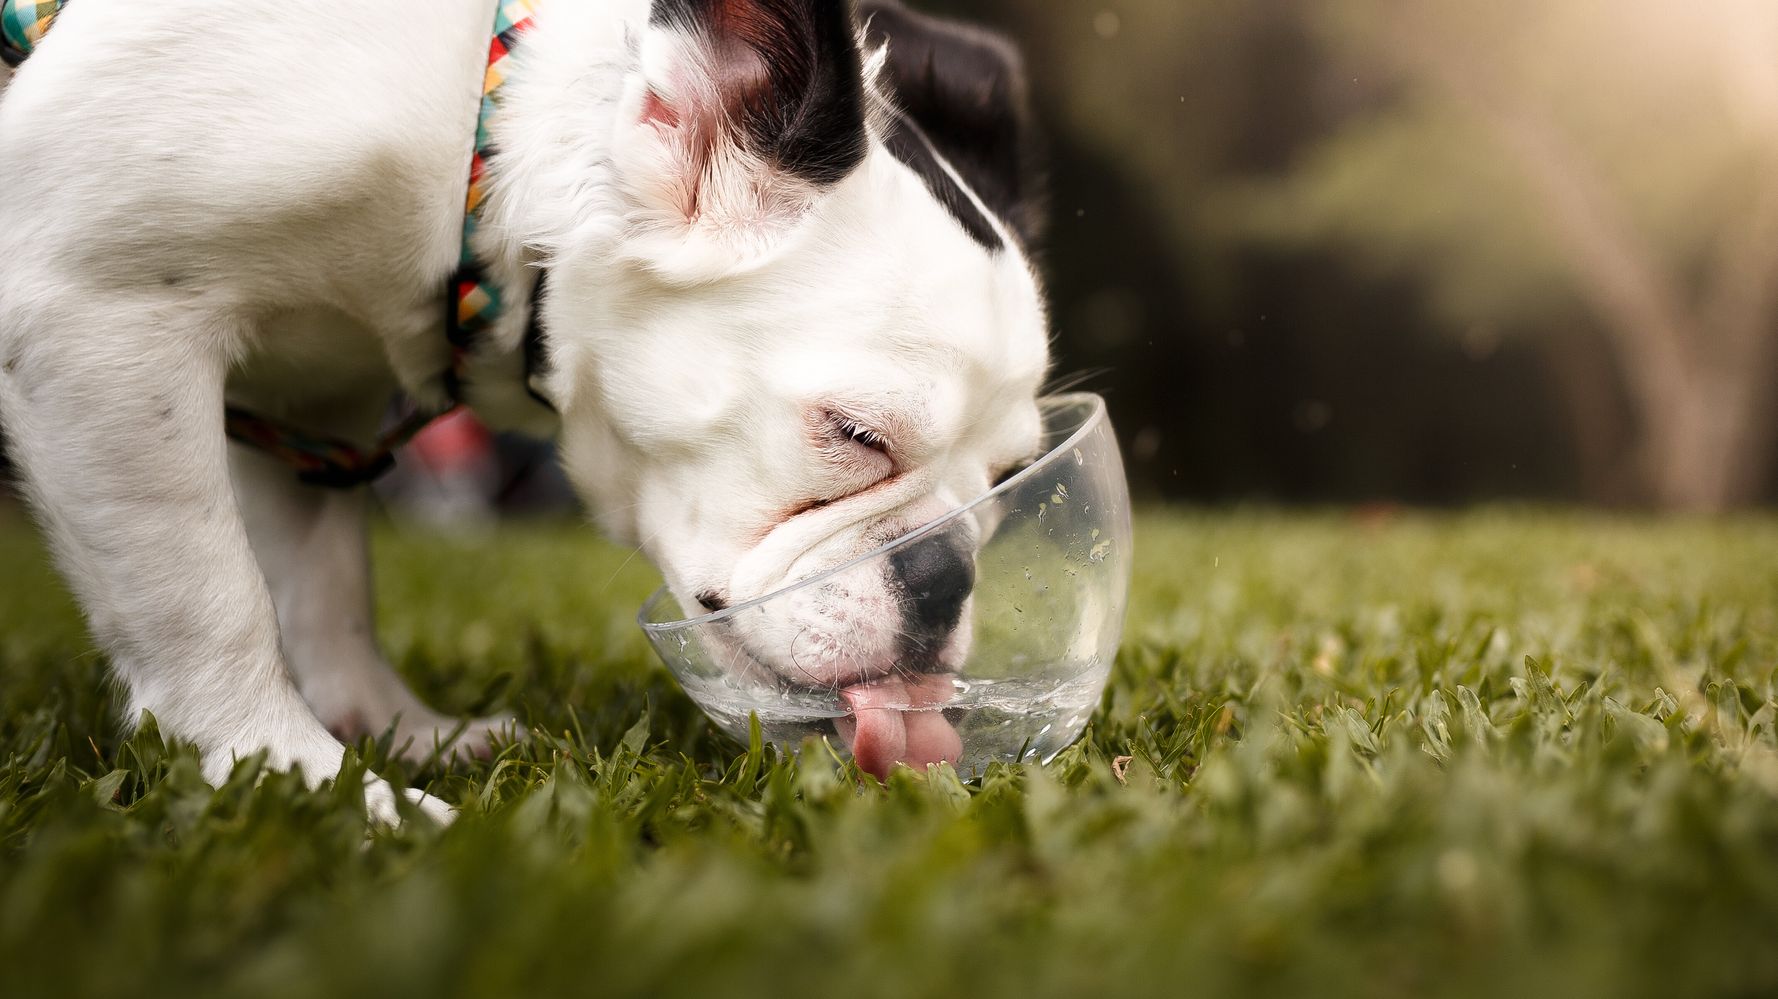 This cute puppy sums up how we all feel about today's heatwave